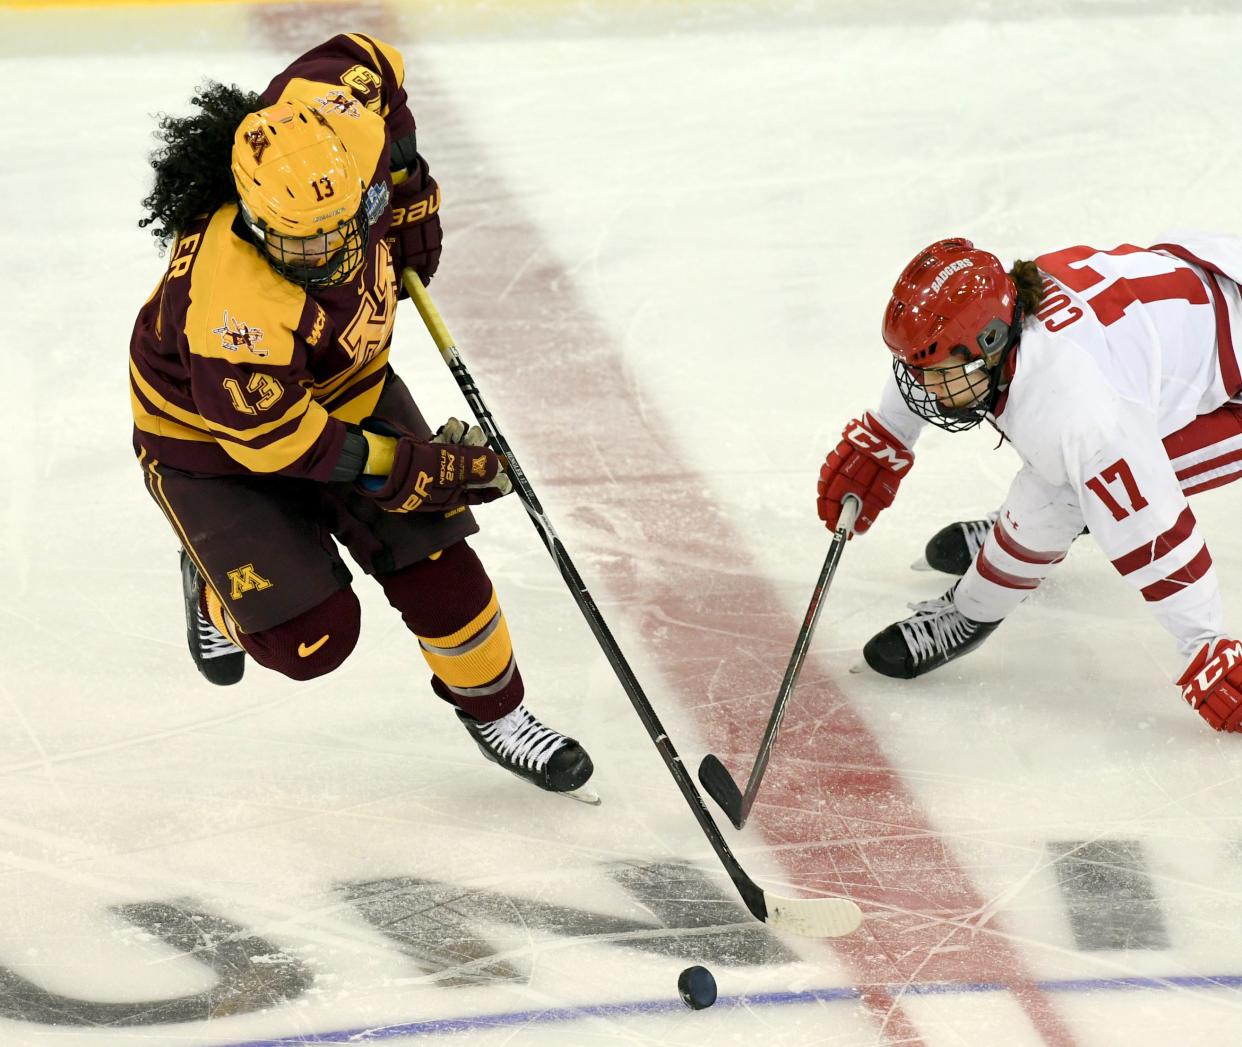 Wisconsin's Britta Curl (17) recorded the first hat trick of her career in a 13-1 win over Bemidji State Dec. 2.